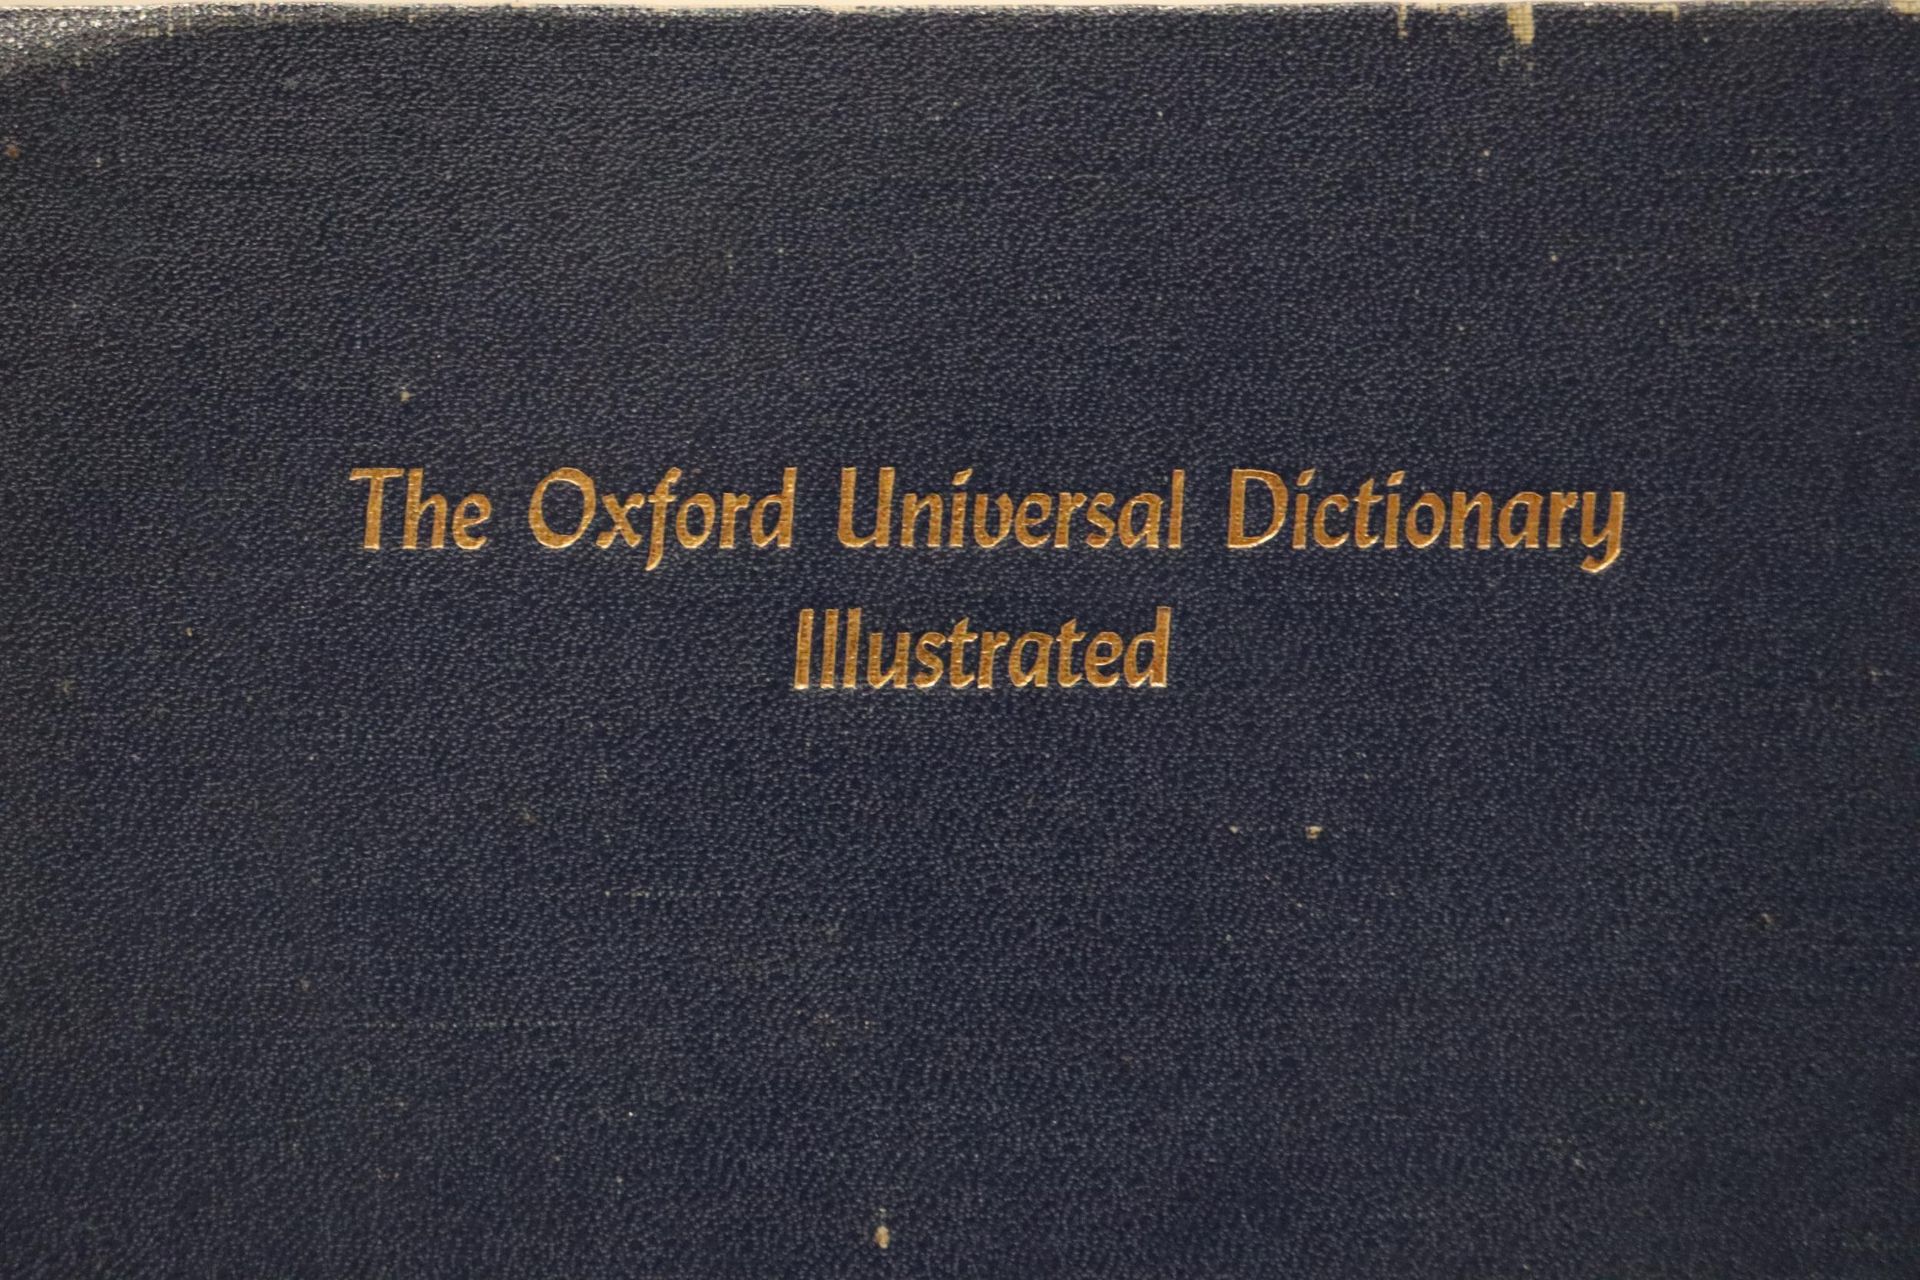 A PAIR OF OXFORD UNIVERSAL DICTIONARY'S IN METAL STAND - Image 5 of 5